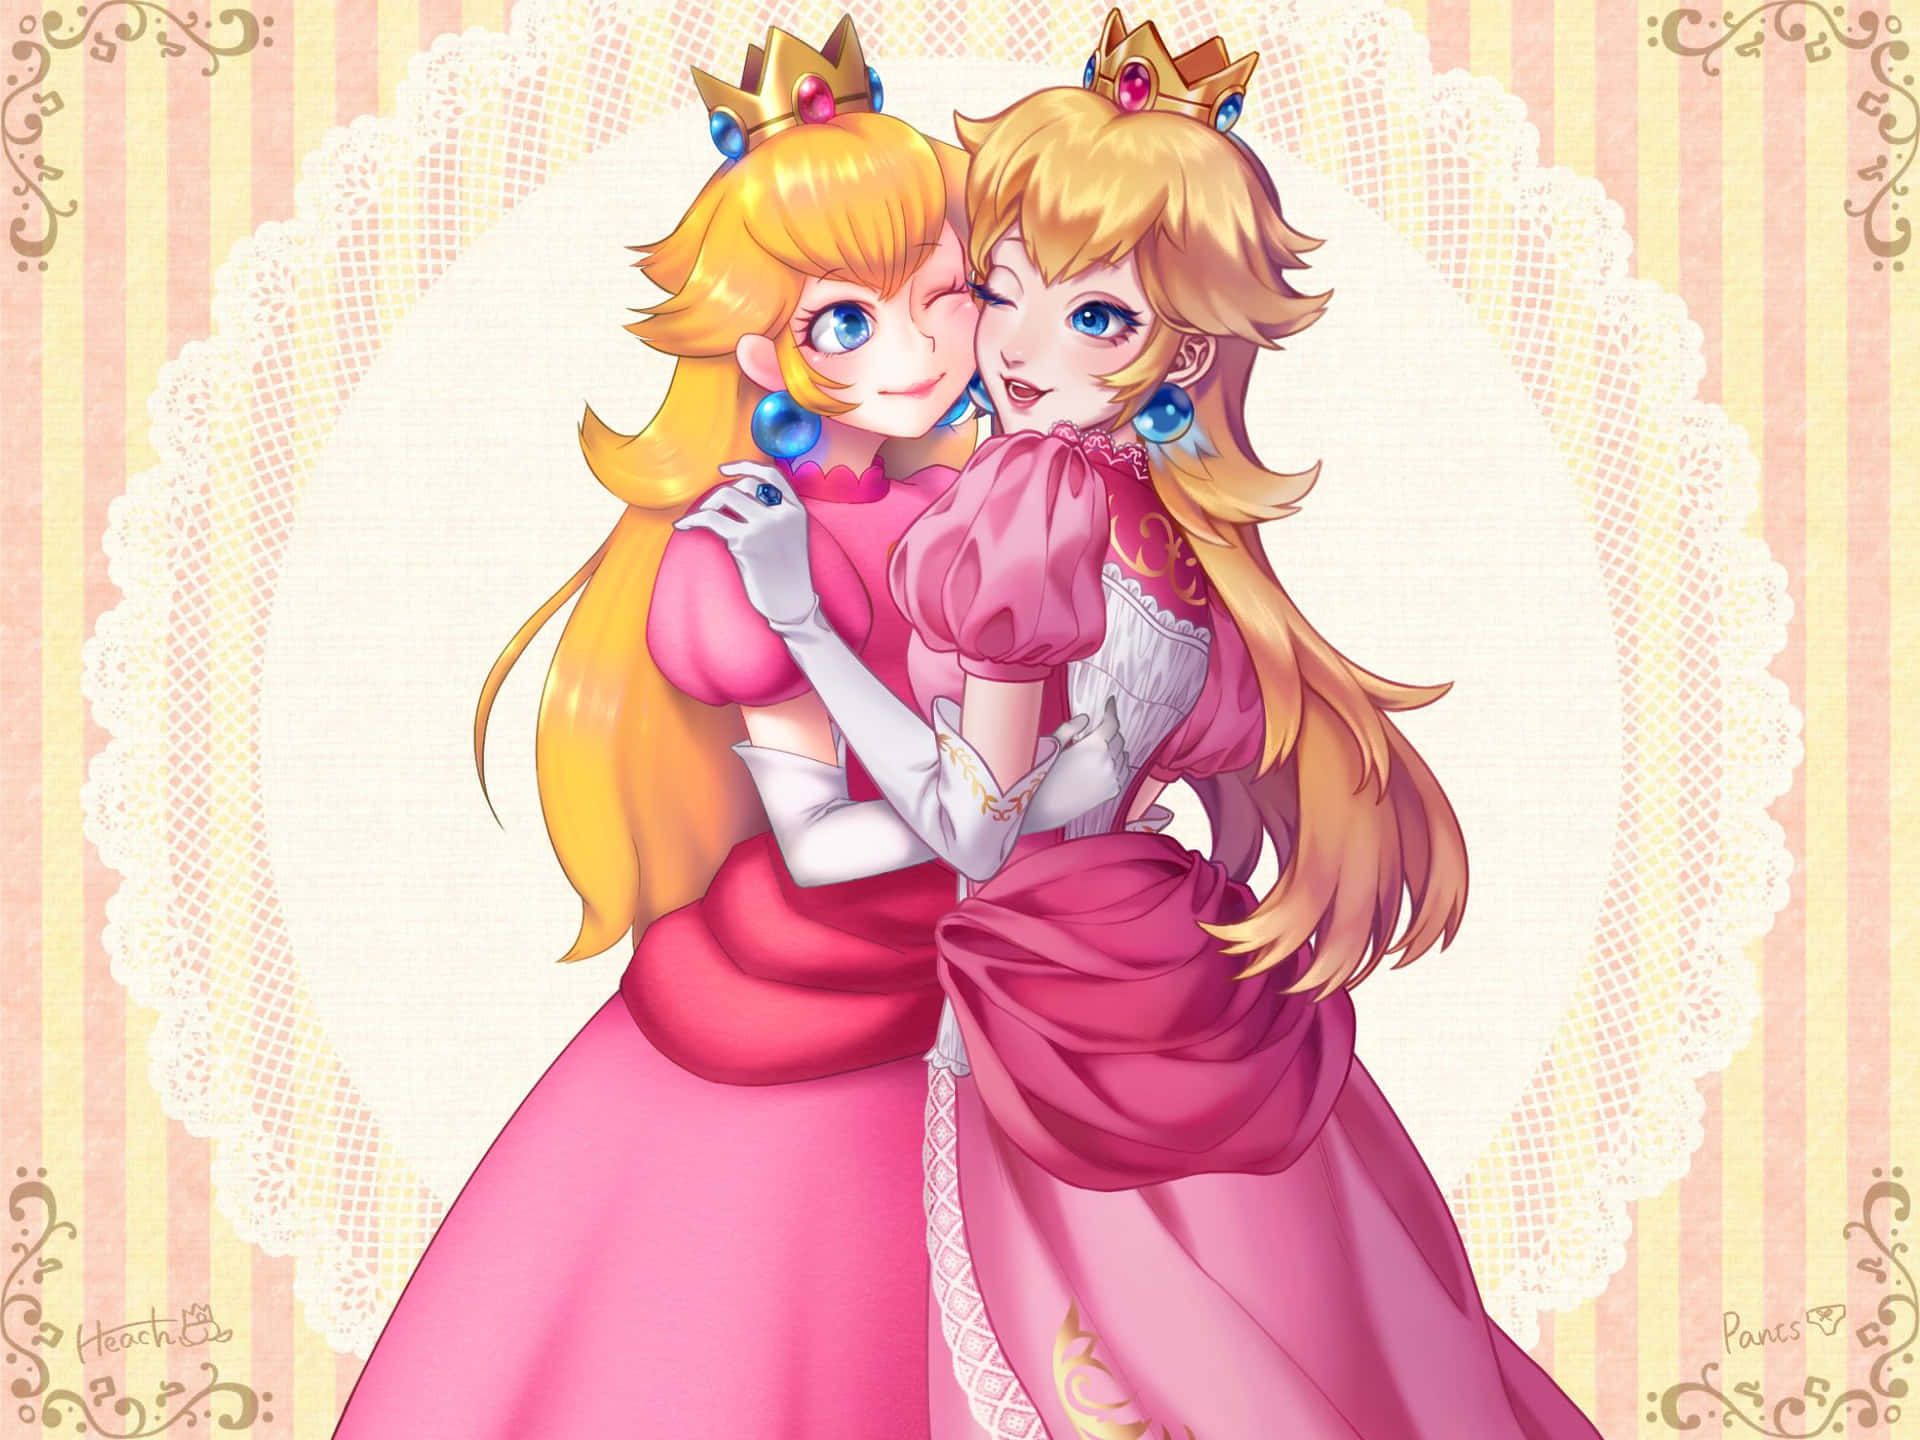 Two anime characters are hugging each other - Princess Peach